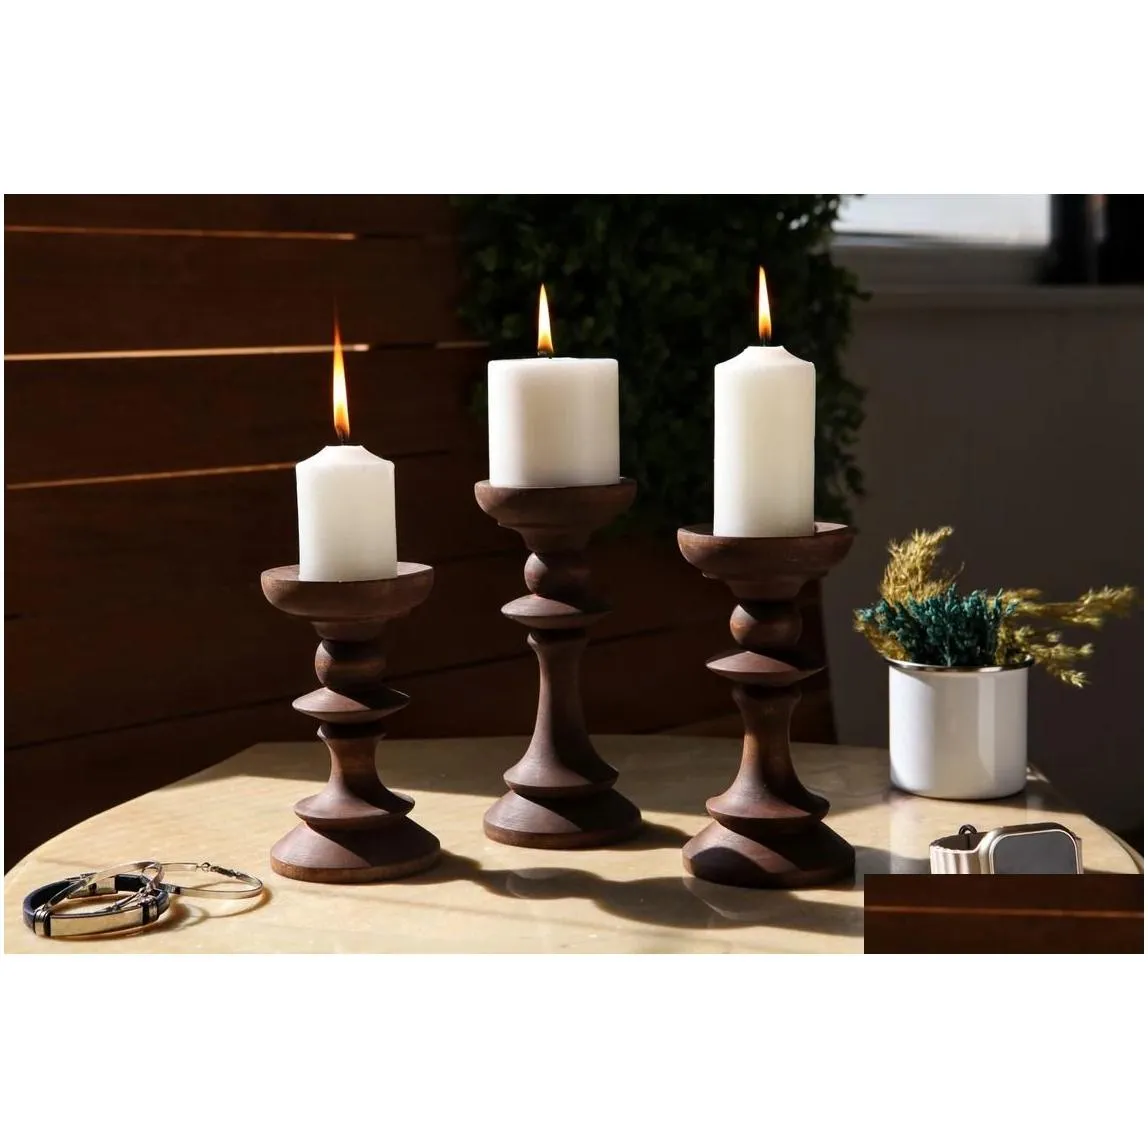 Candle Holders Handmade Candle Holders - Home Decor Gift Wooden Candlestick Wedding New Gifts Wood Drop Delivery Home Garden Home Deco Otcrt